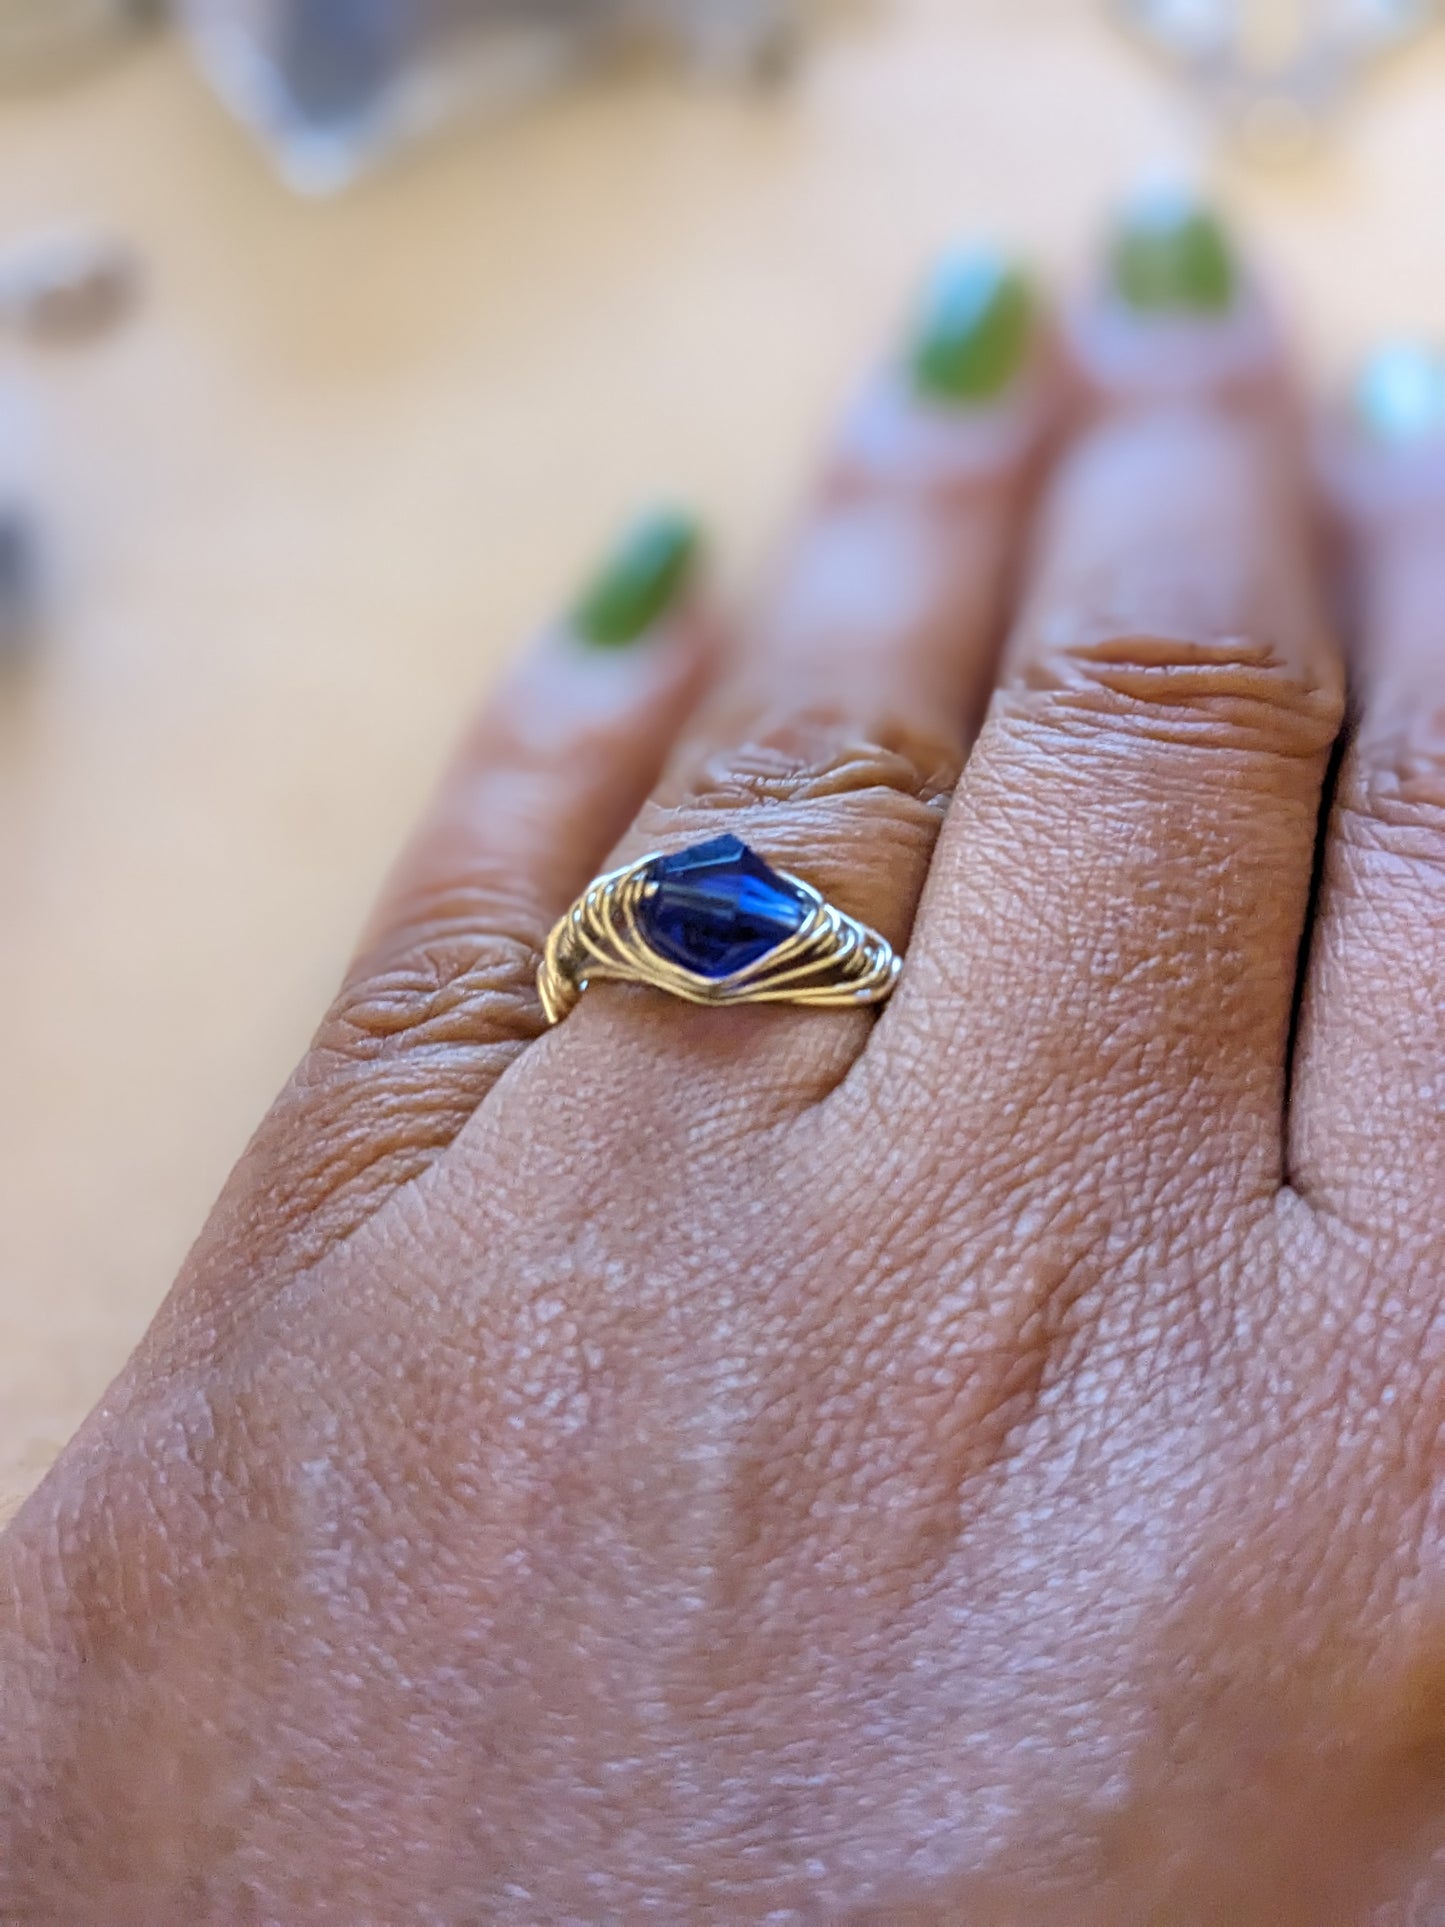 Silver wire wrapped ring with a blue stone on a person's hand 